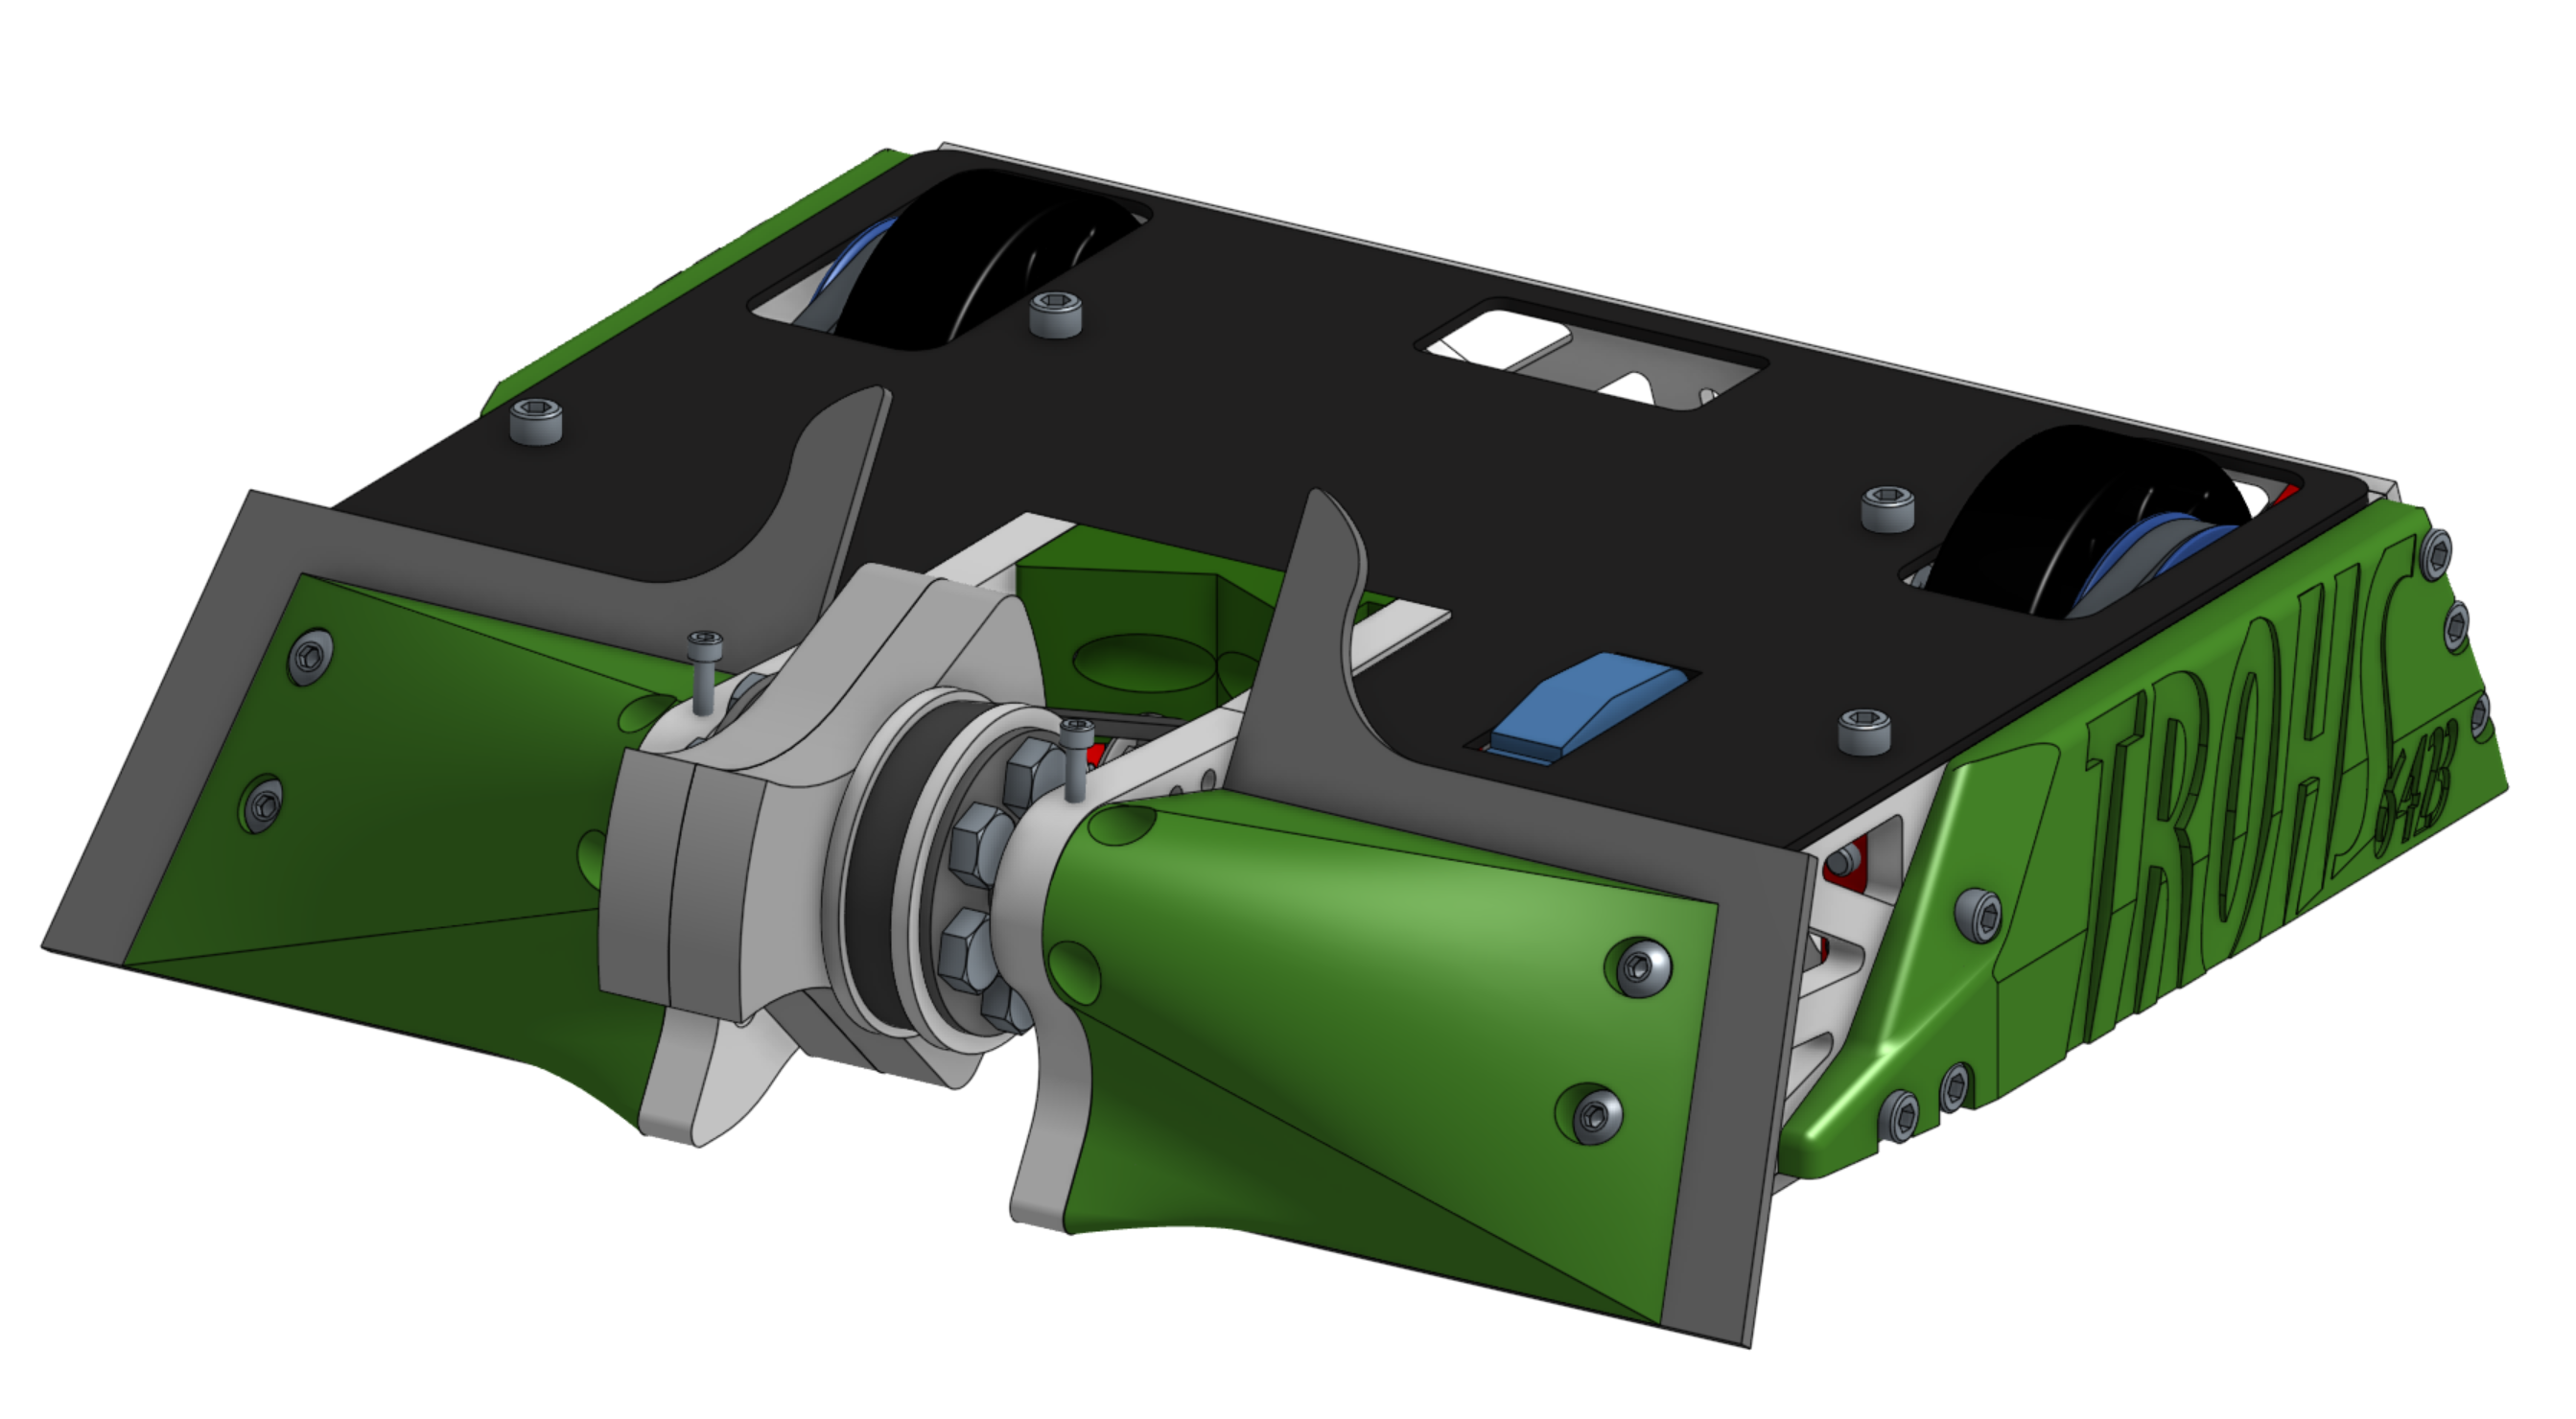 The finished CAD of the robot